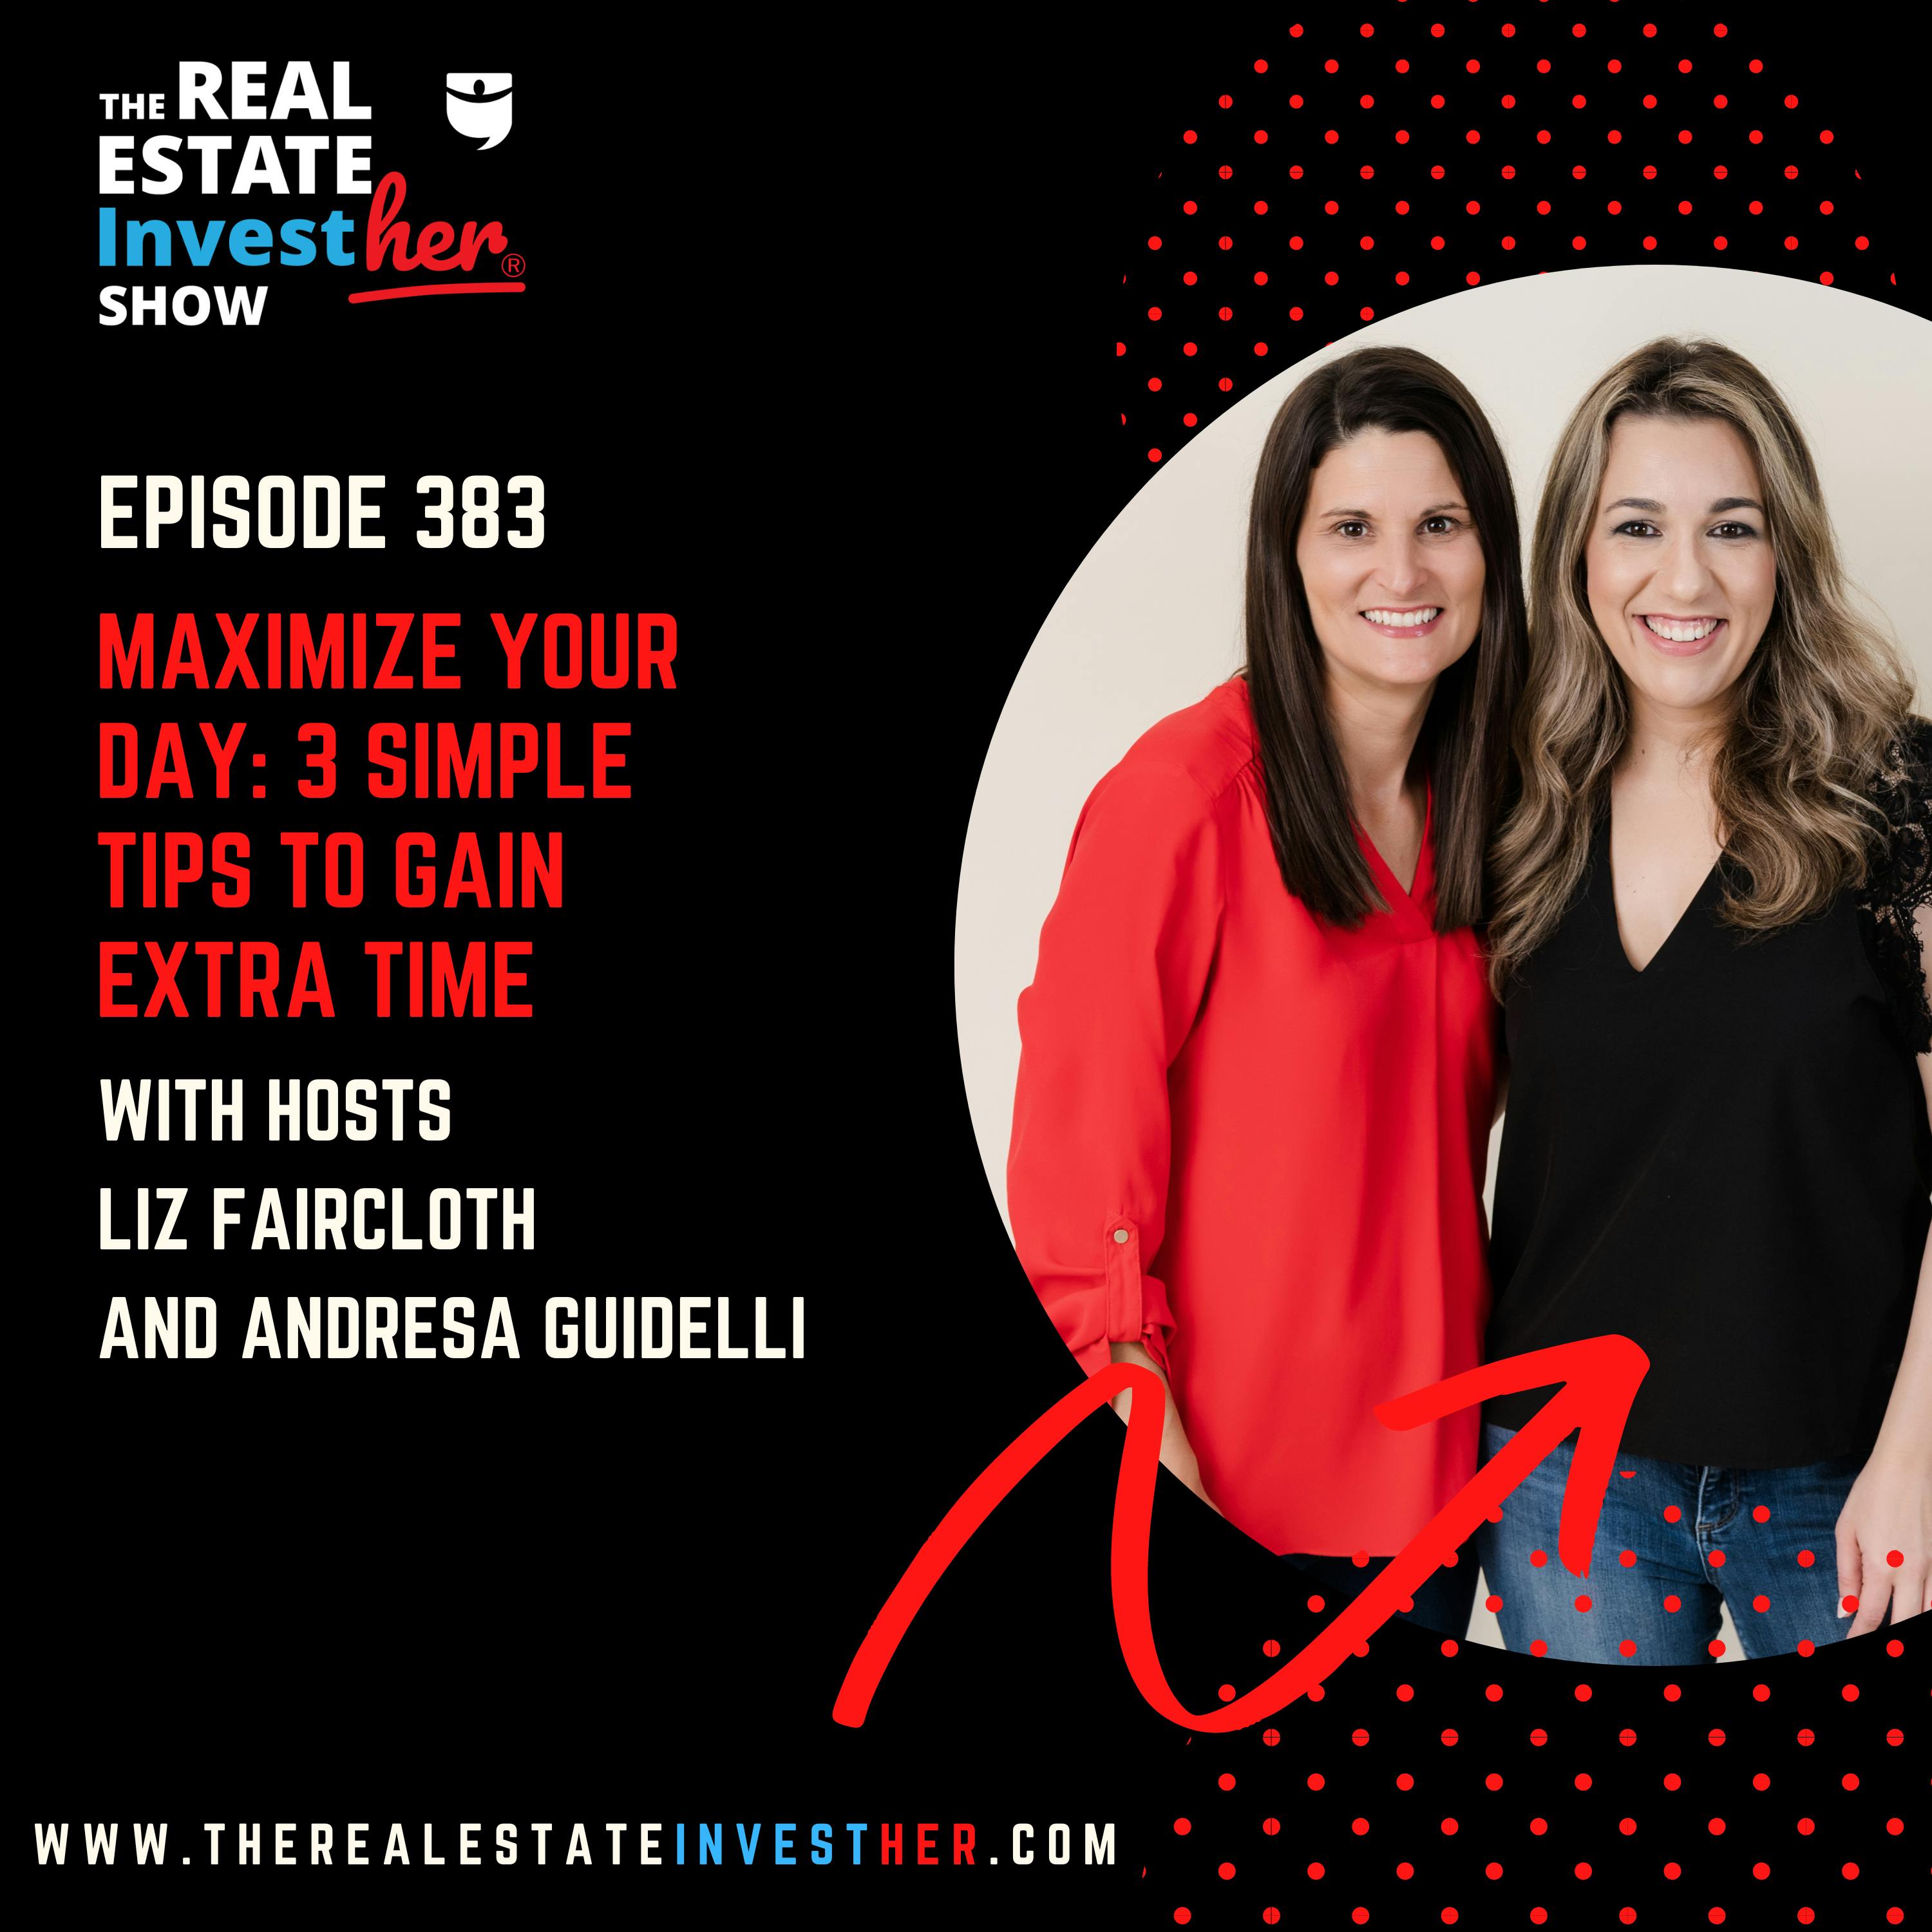 Maximize Your Day: 3 Simple Tips to Gain Extra Time (Minisode)